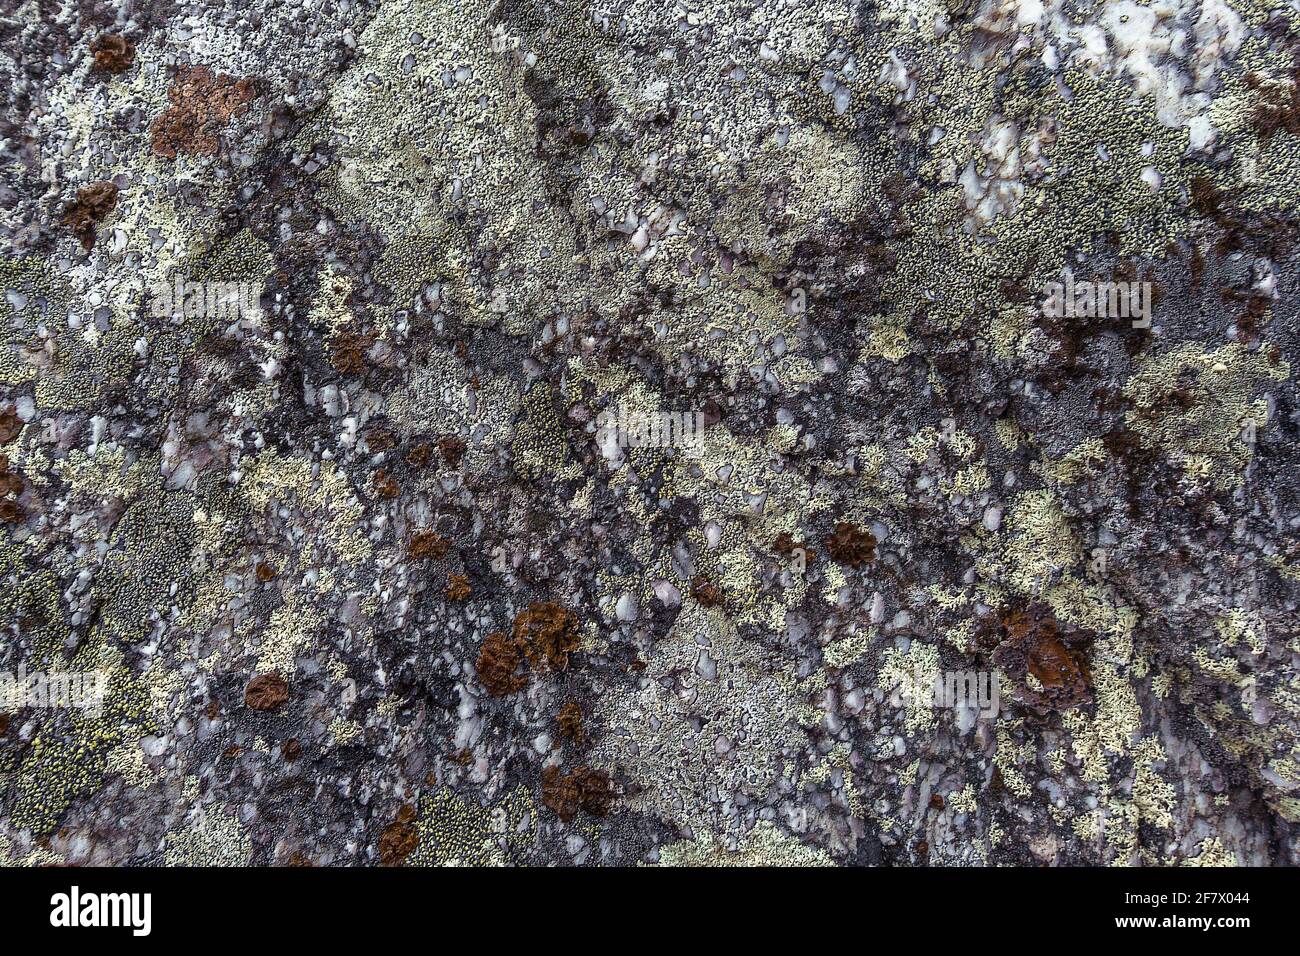 lichen on a rocks a camo style background. Natural moss texture